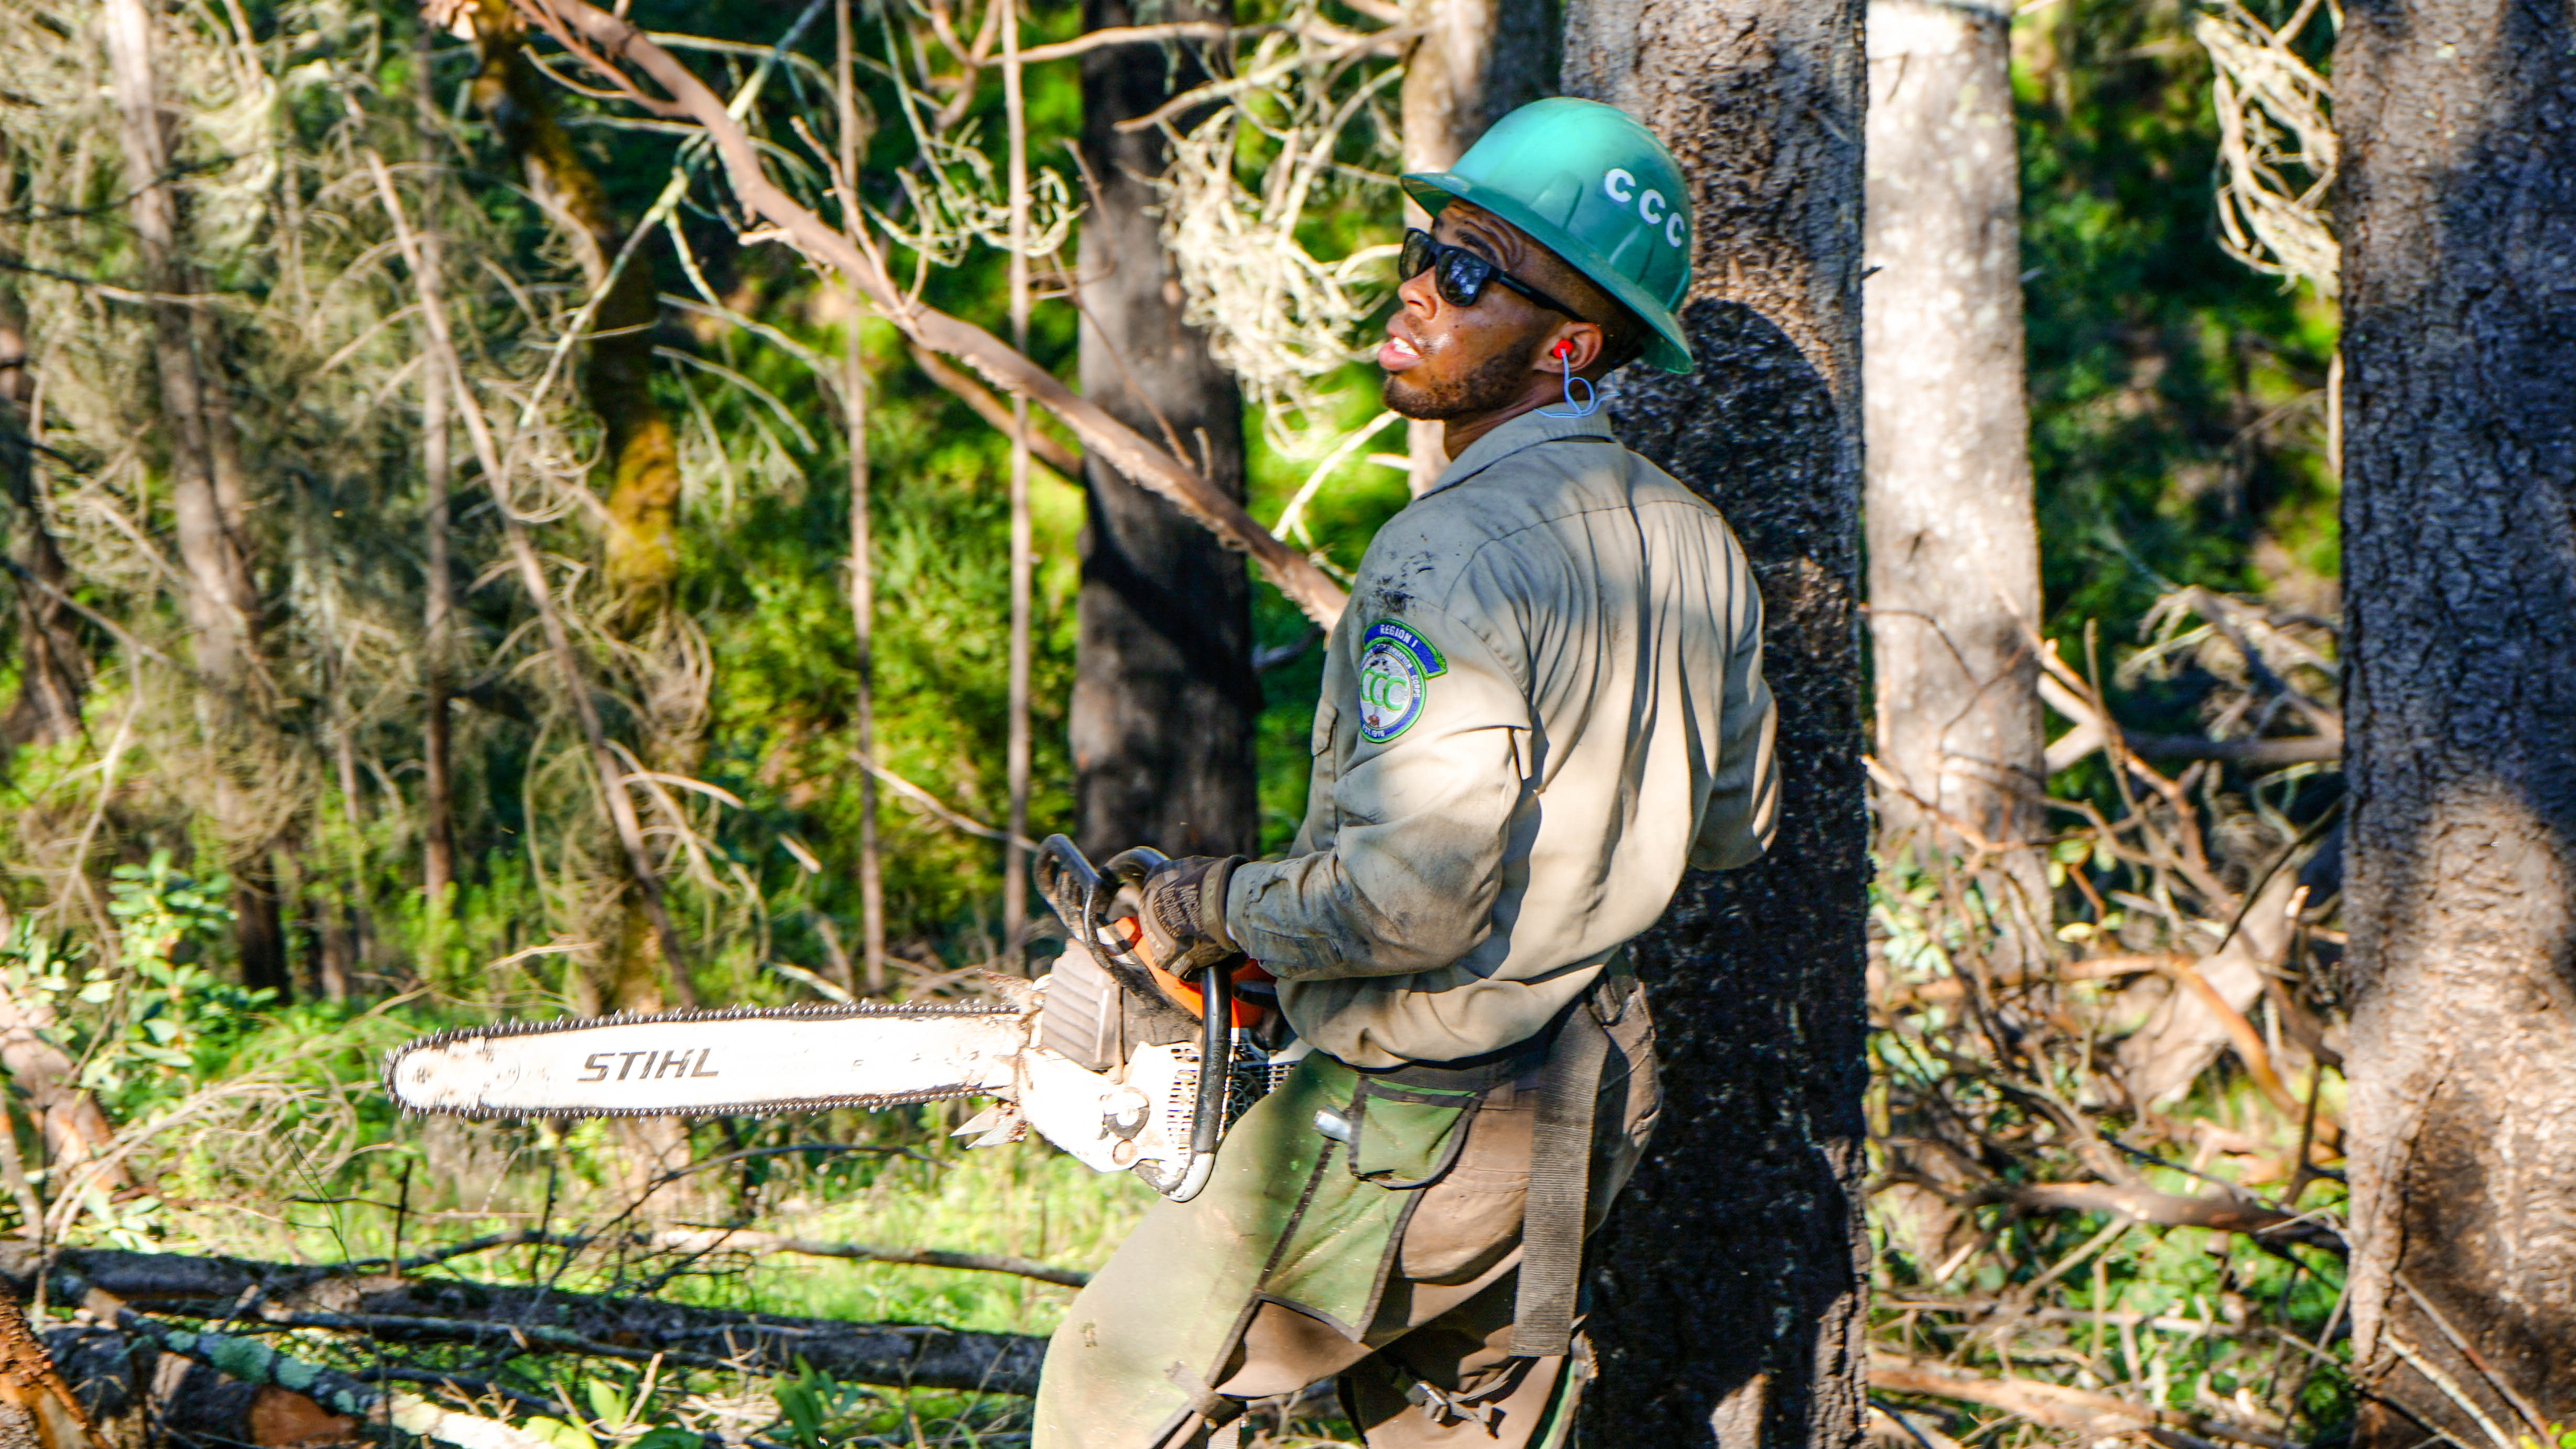 man in wooded area holding chain saw wearing safety equipment